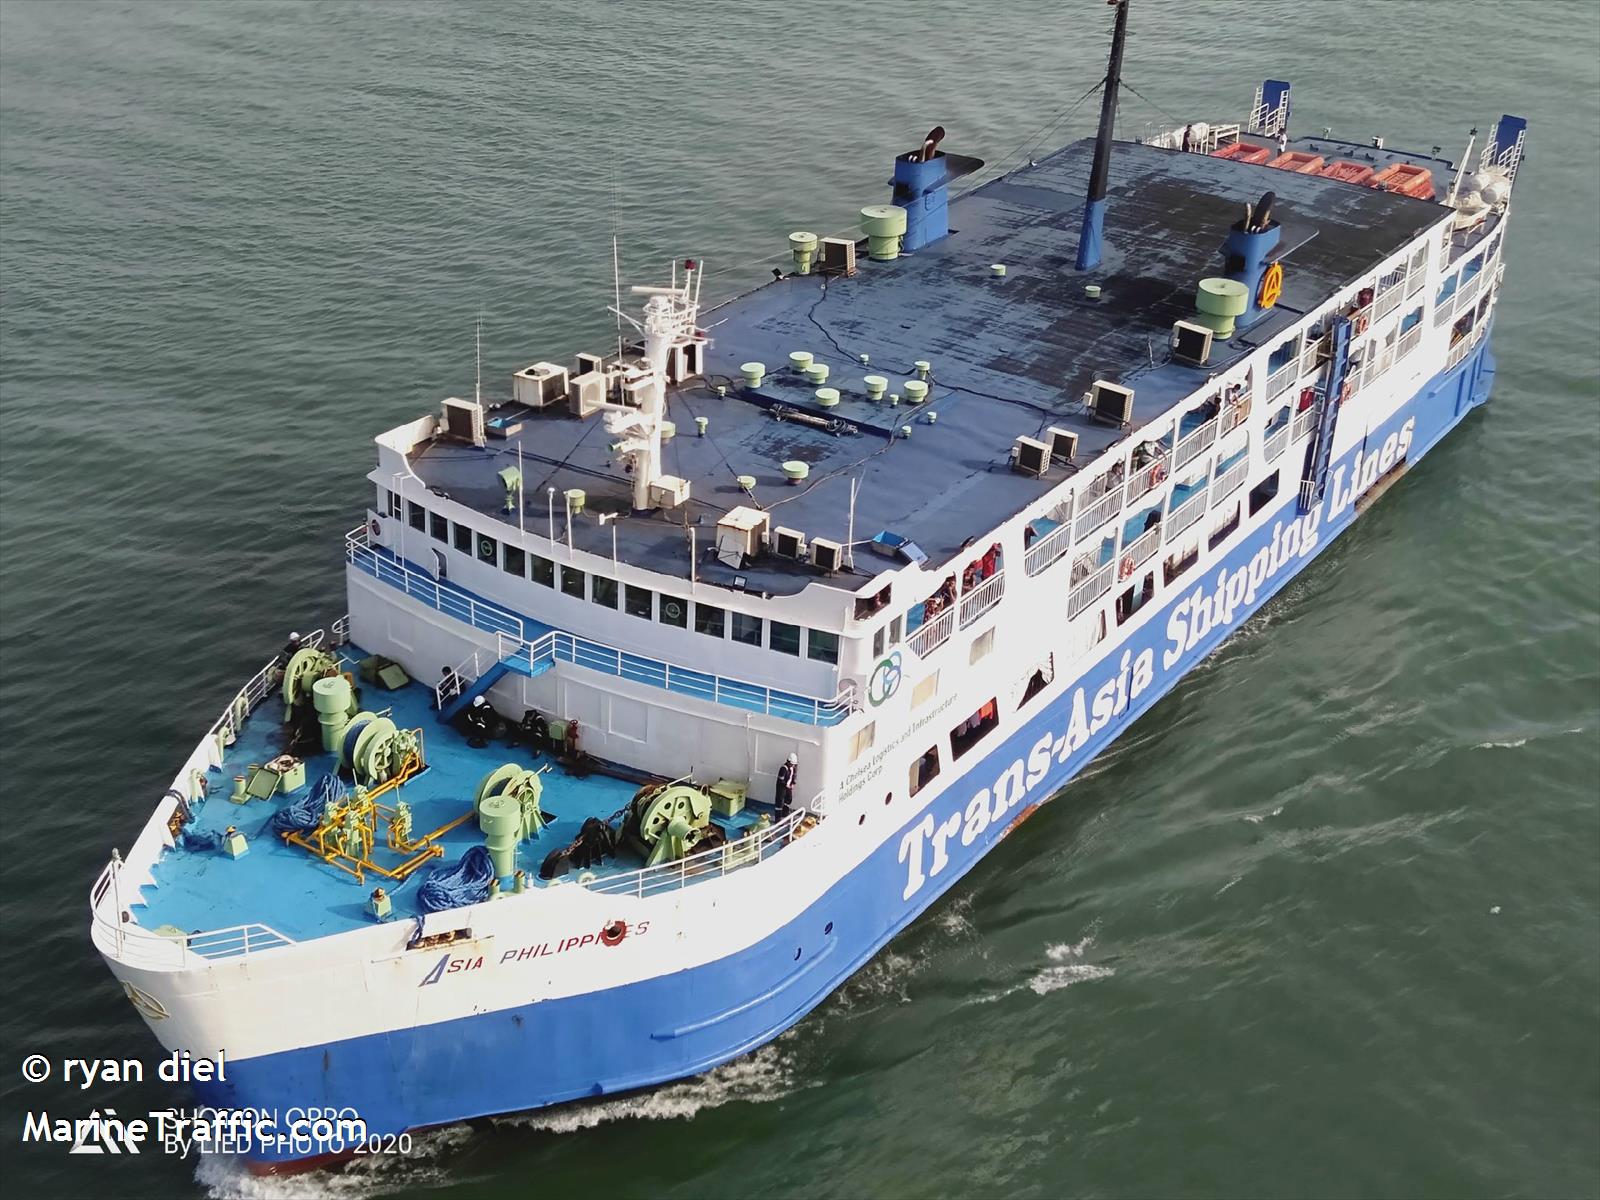 The passenger vessel Asia Philippines, before the fire accident on the 26 August, photo credit: Ryan Diel, marinetraffic.com